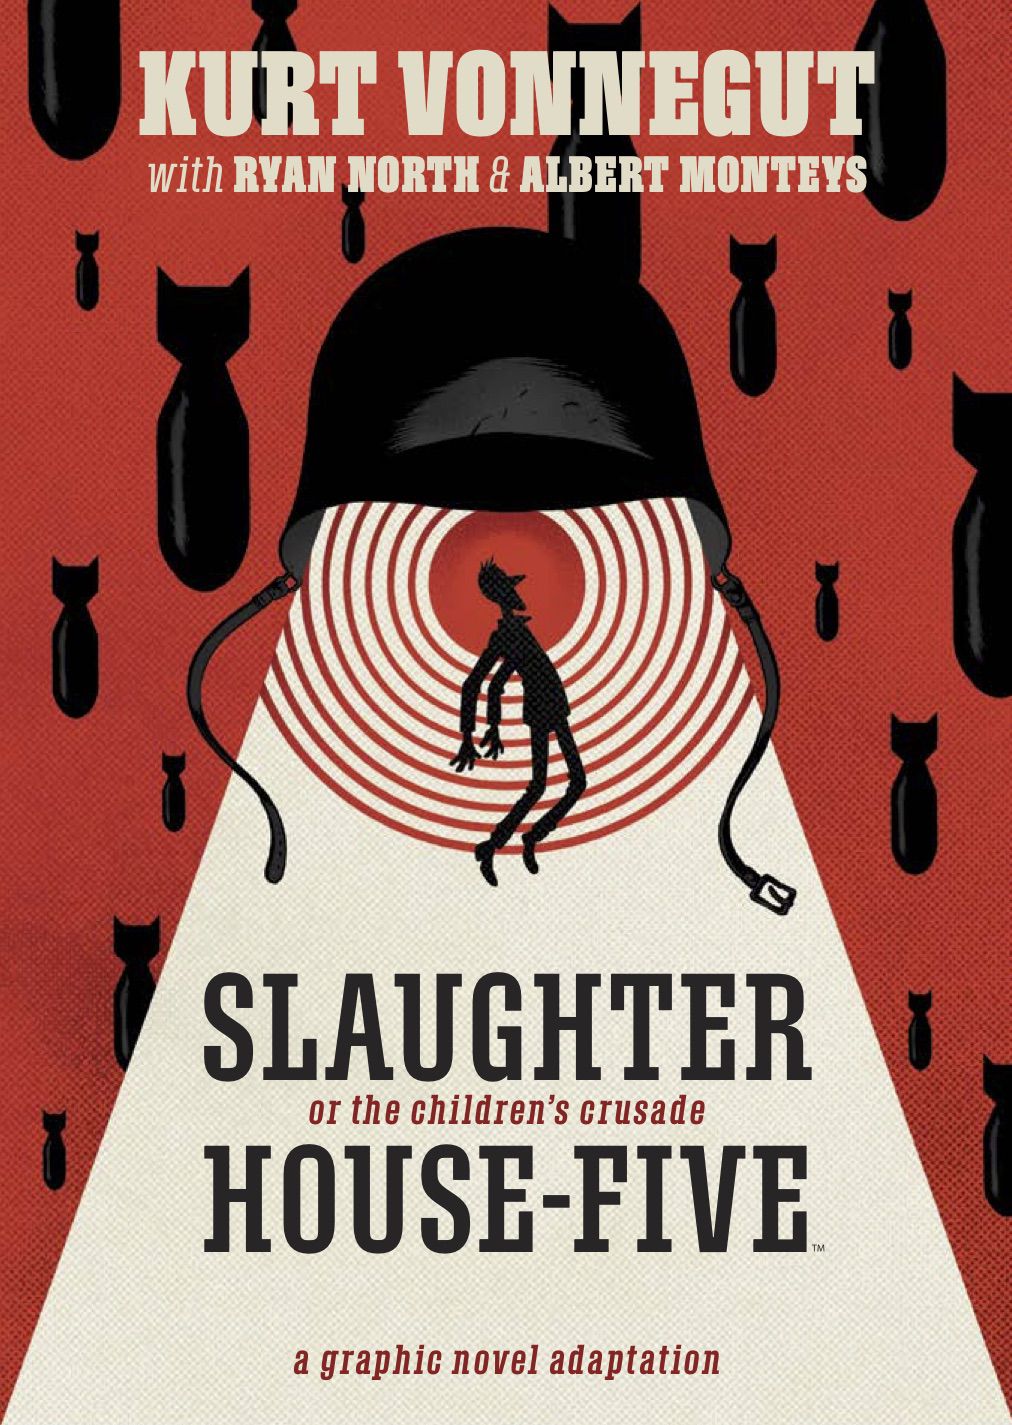 Billy Pilgrim floats upward as if in a tractor beam into a giant military helmet, as bombs rain down around him on the cover of Slaughterhouse-Five (2020).